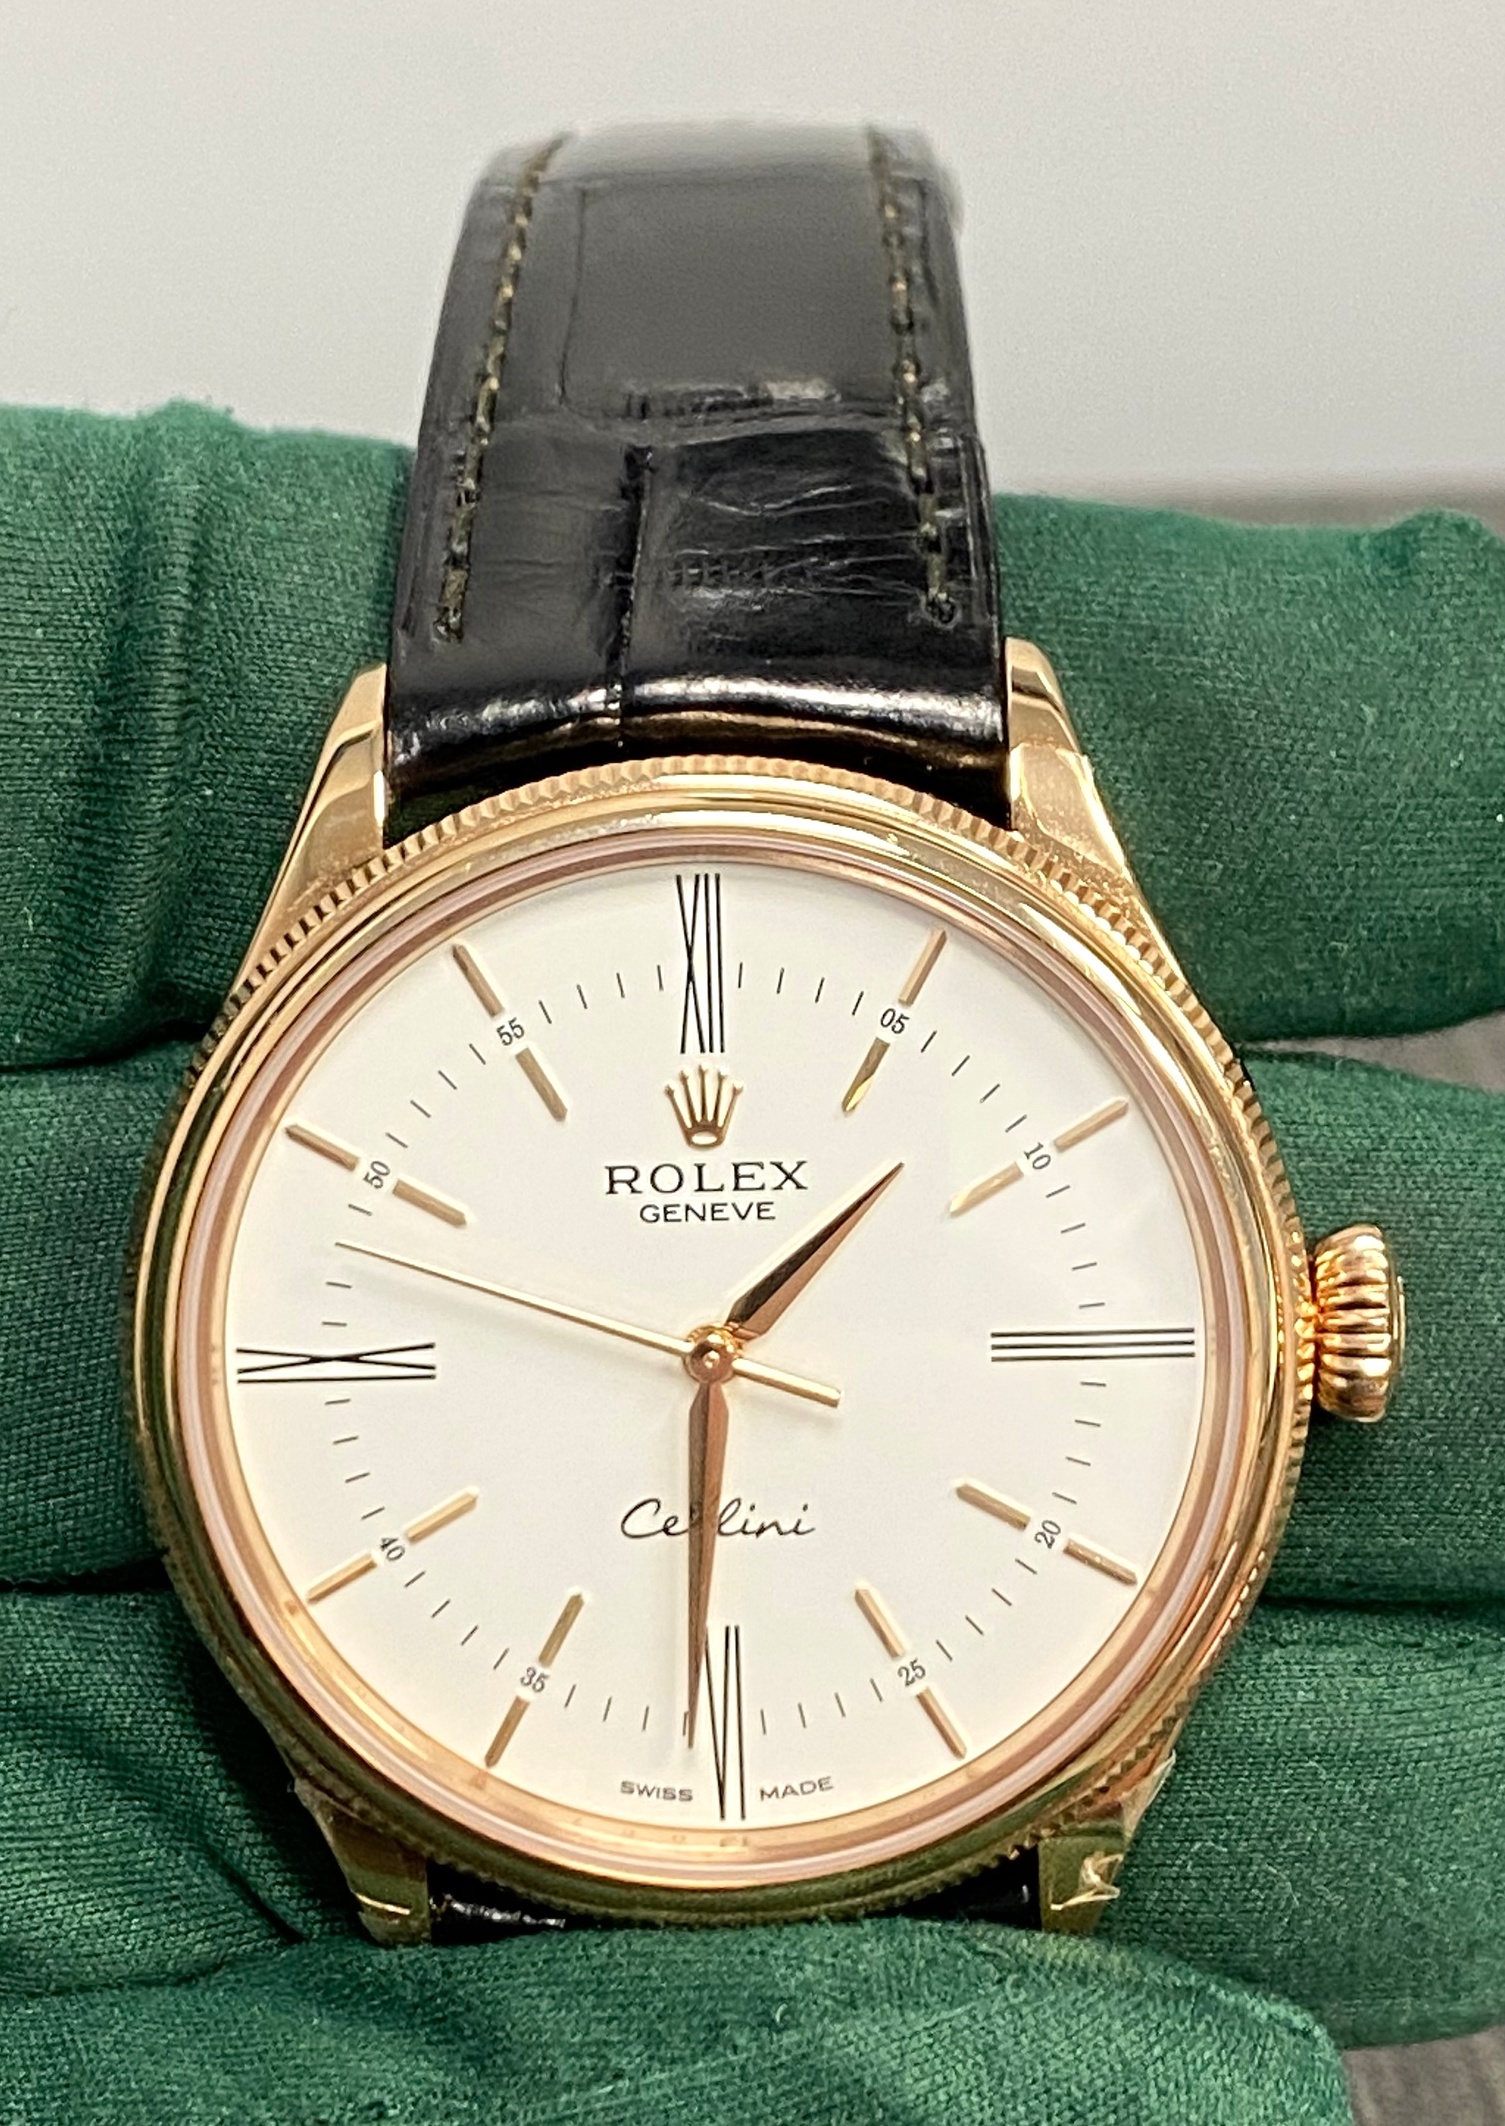 Kong Lear tab Eksisterer Rolex Cellini Time Rose Gold 39mm Watch : buy at the best prices in Catalog  of premium watches SwissWatchesForSale.com